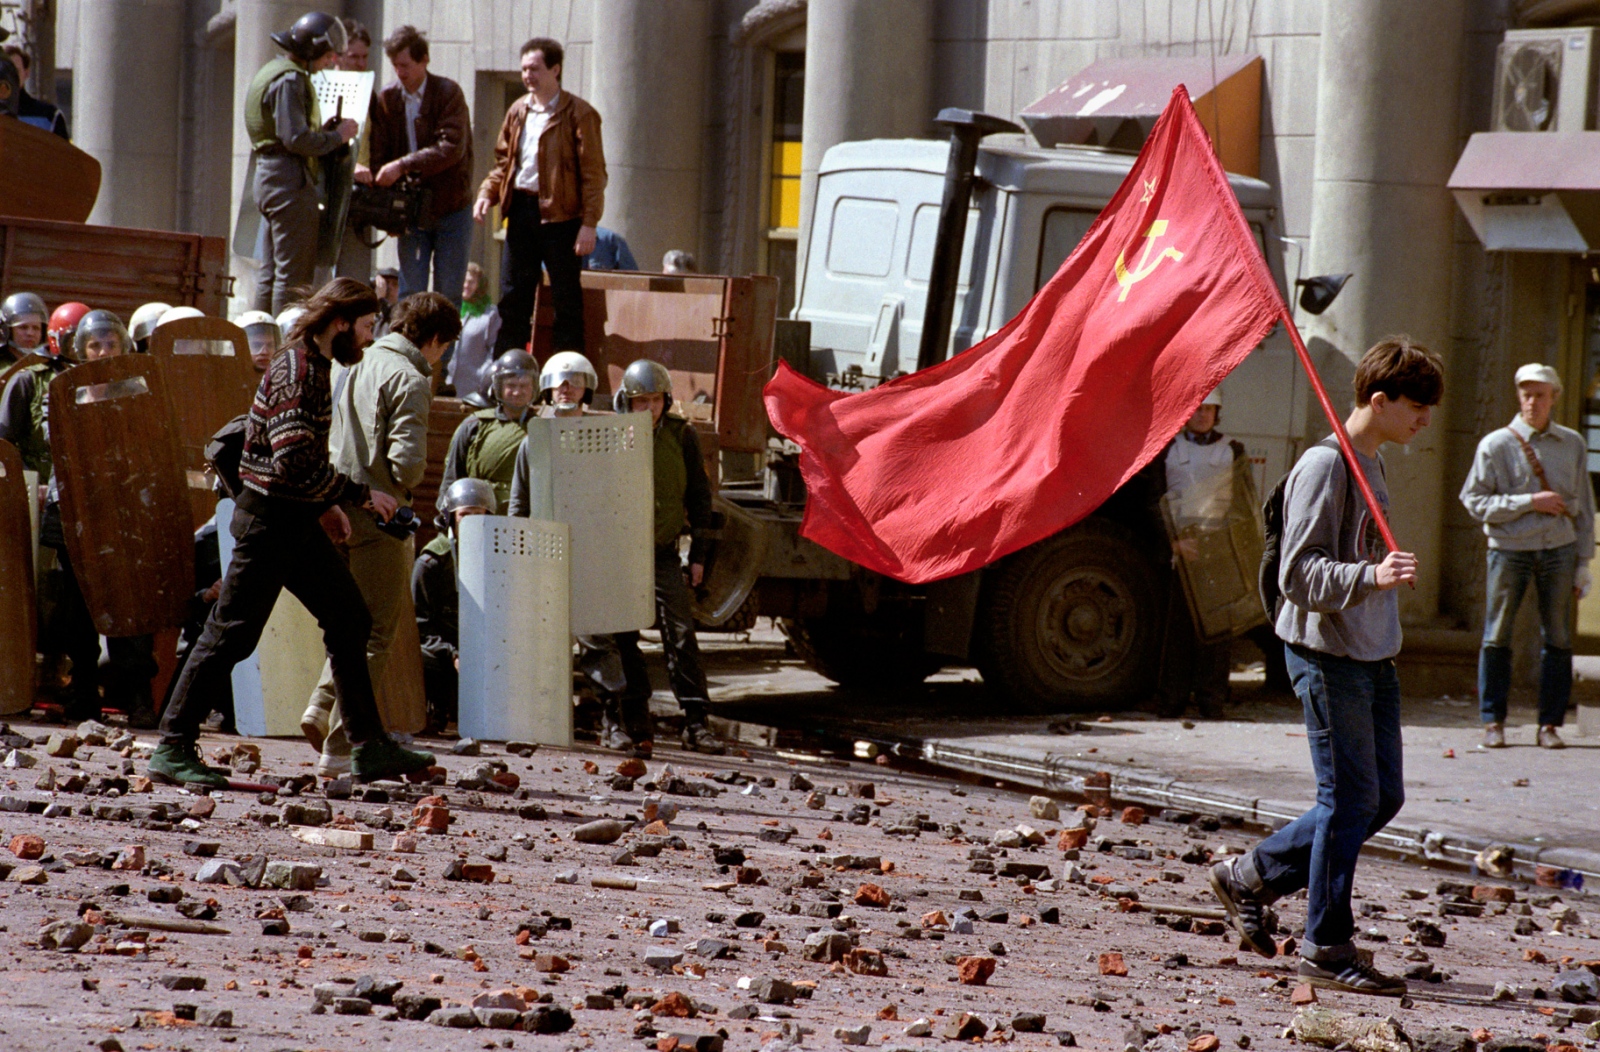 Russia In Transition - 1990s - A communist protester leaves the scene after a violent...